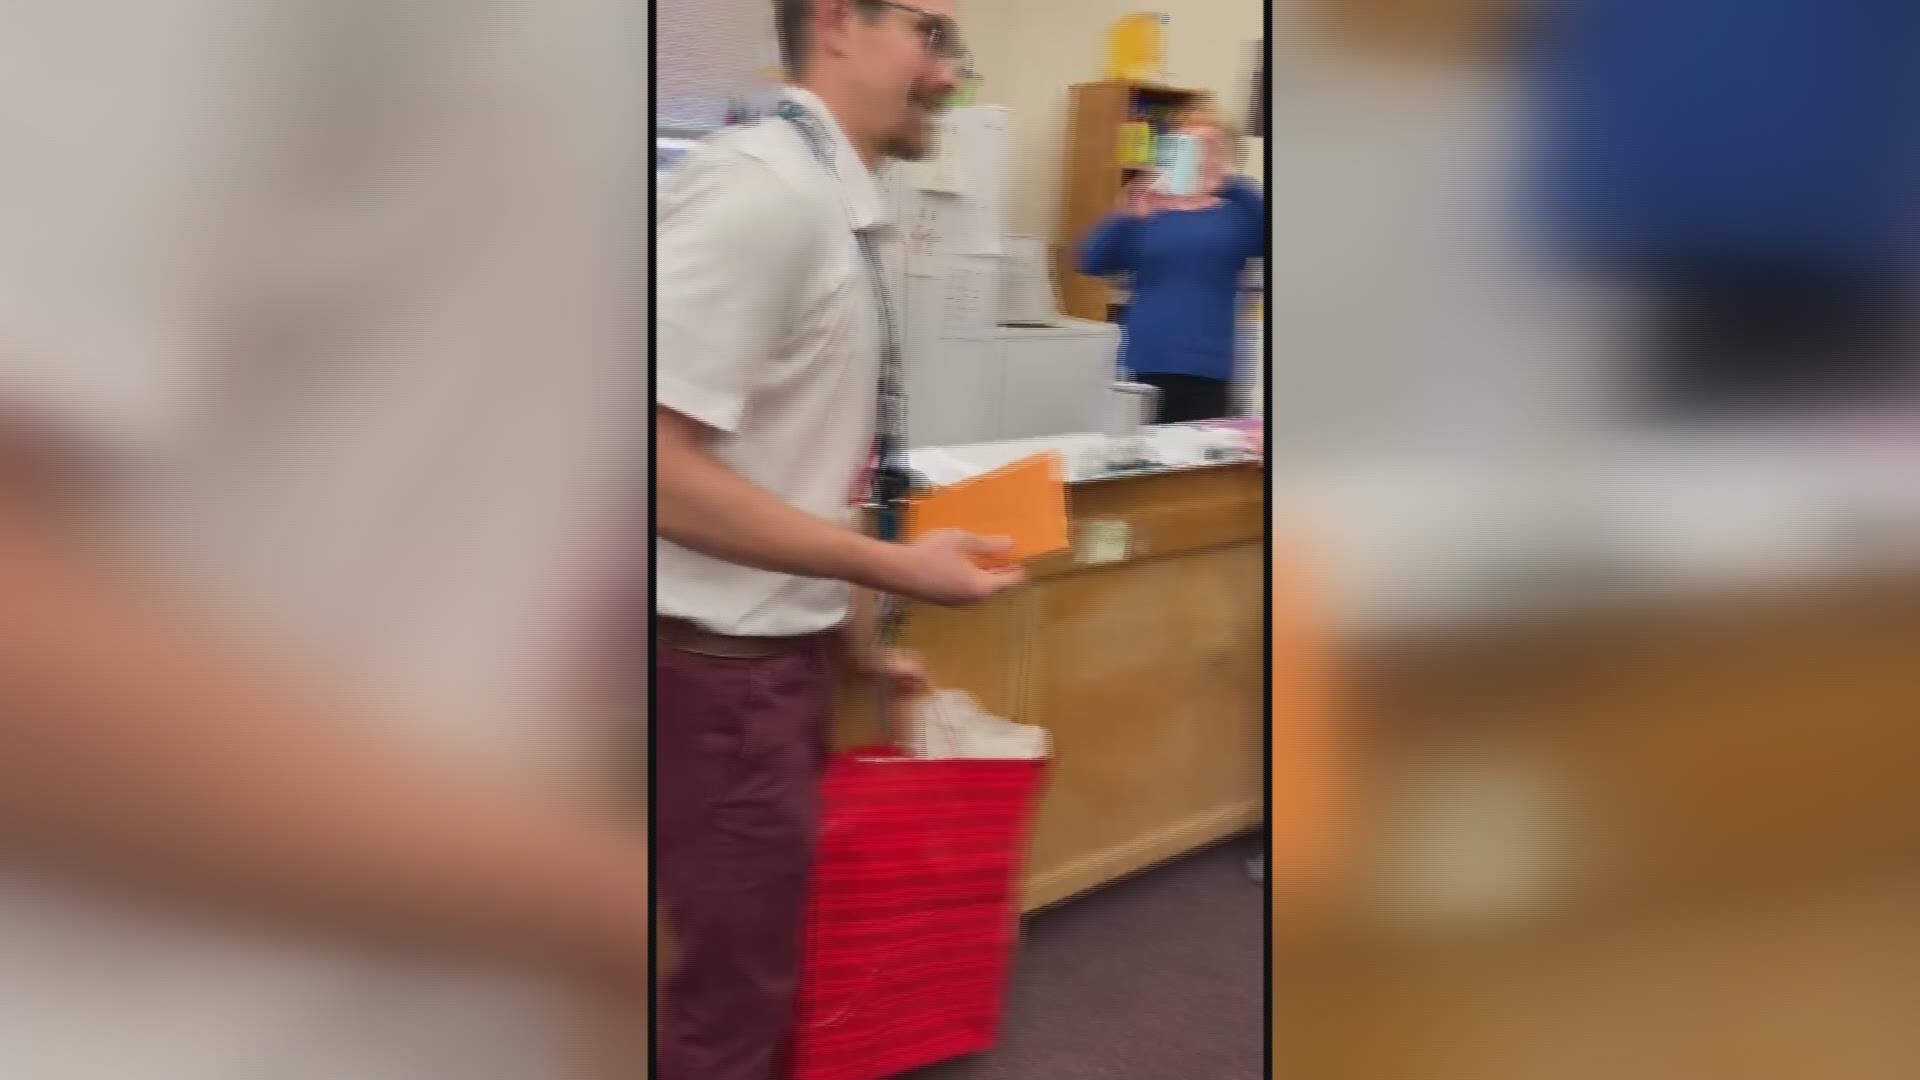 A teacher in Washington State had something stolen from his classroom and his students pooled their money together to surprise him.